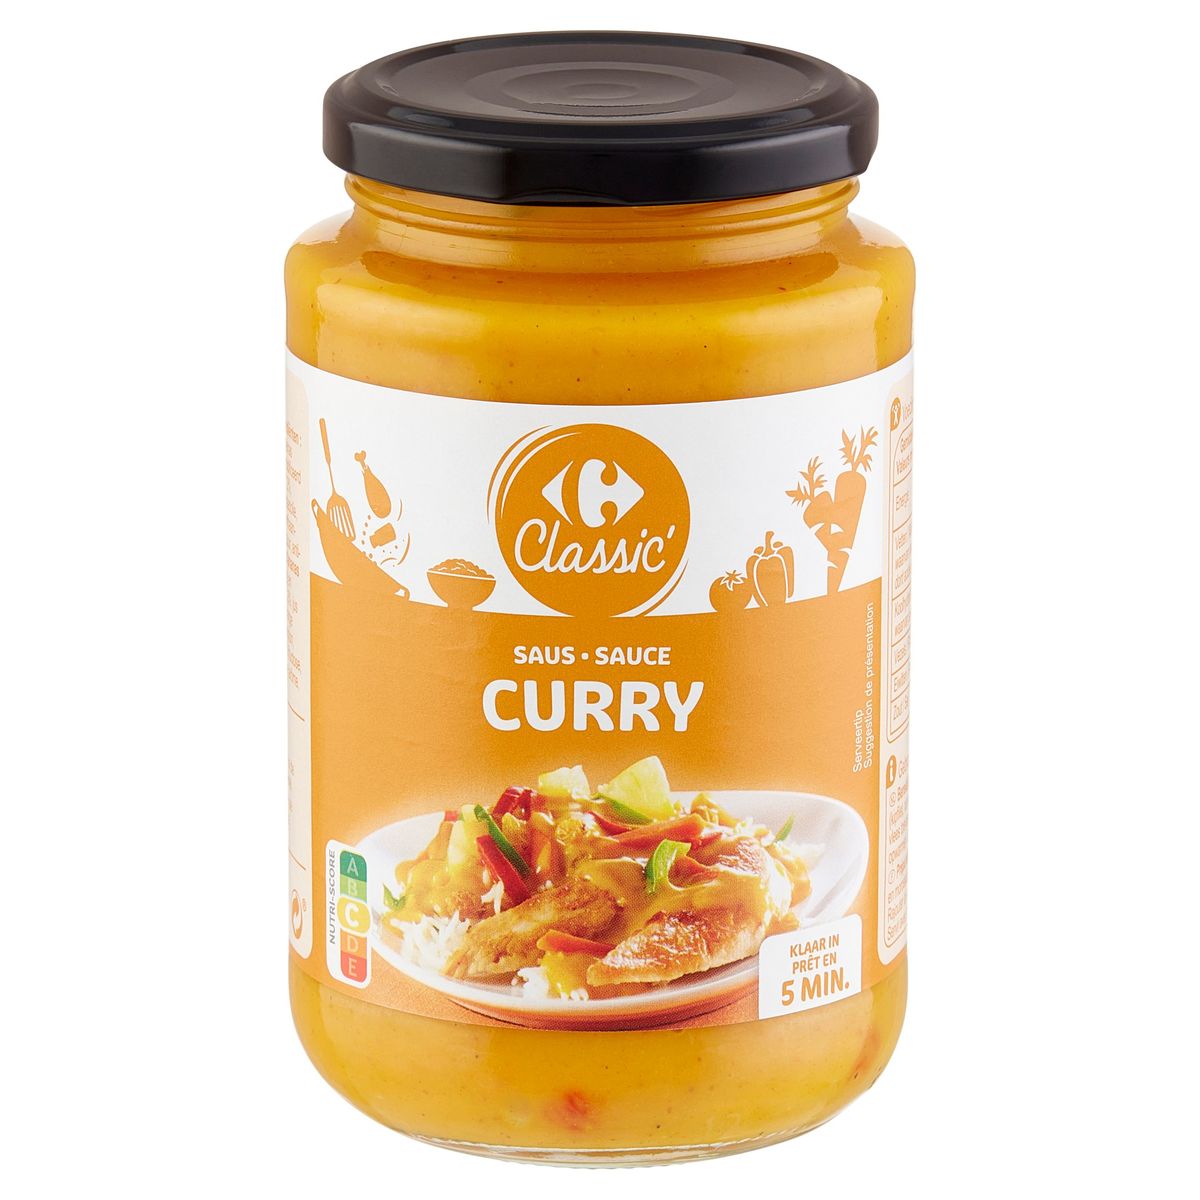 Sauce Curry - Carrefour - 350 g